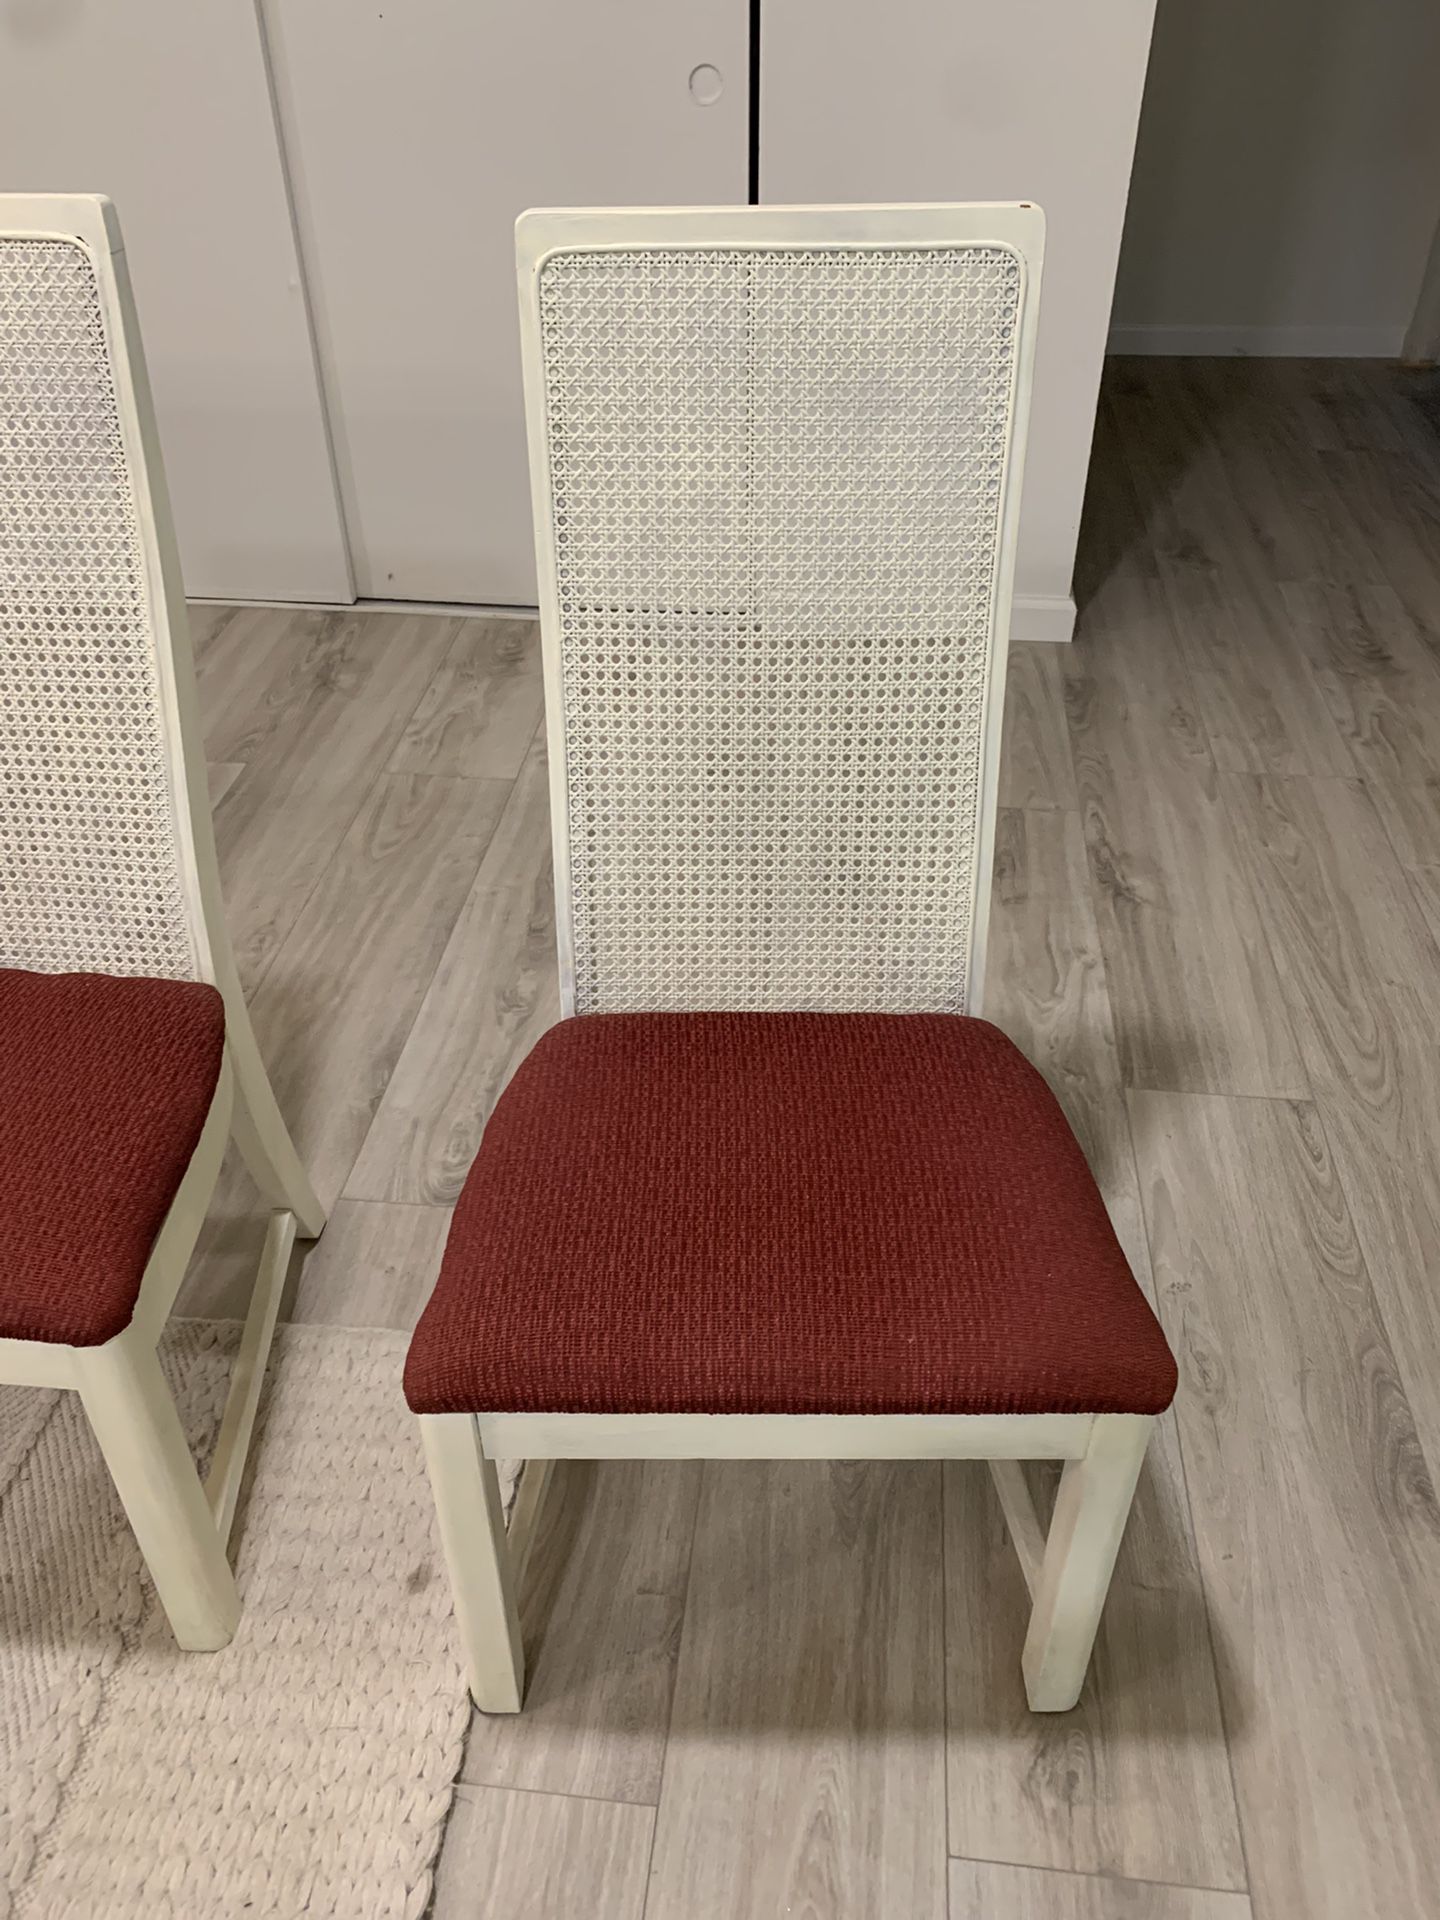 4 Cane Back Chairs 